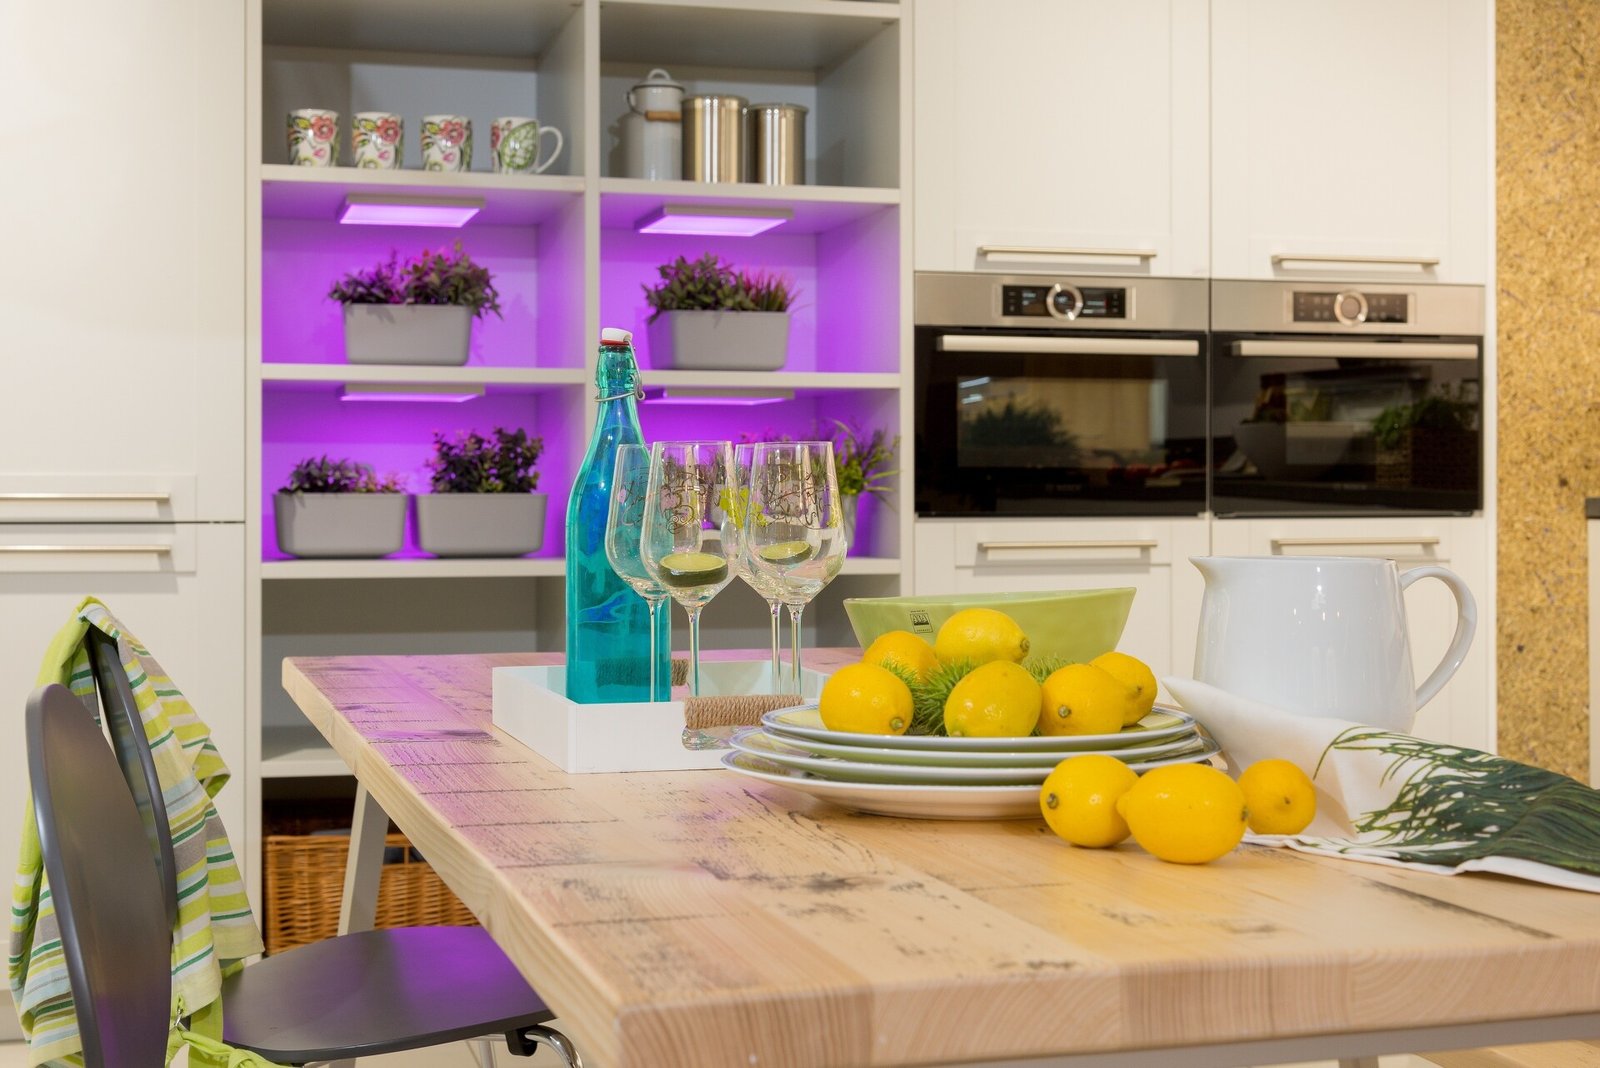 Modern kitchen in purple attractive and very elegant at